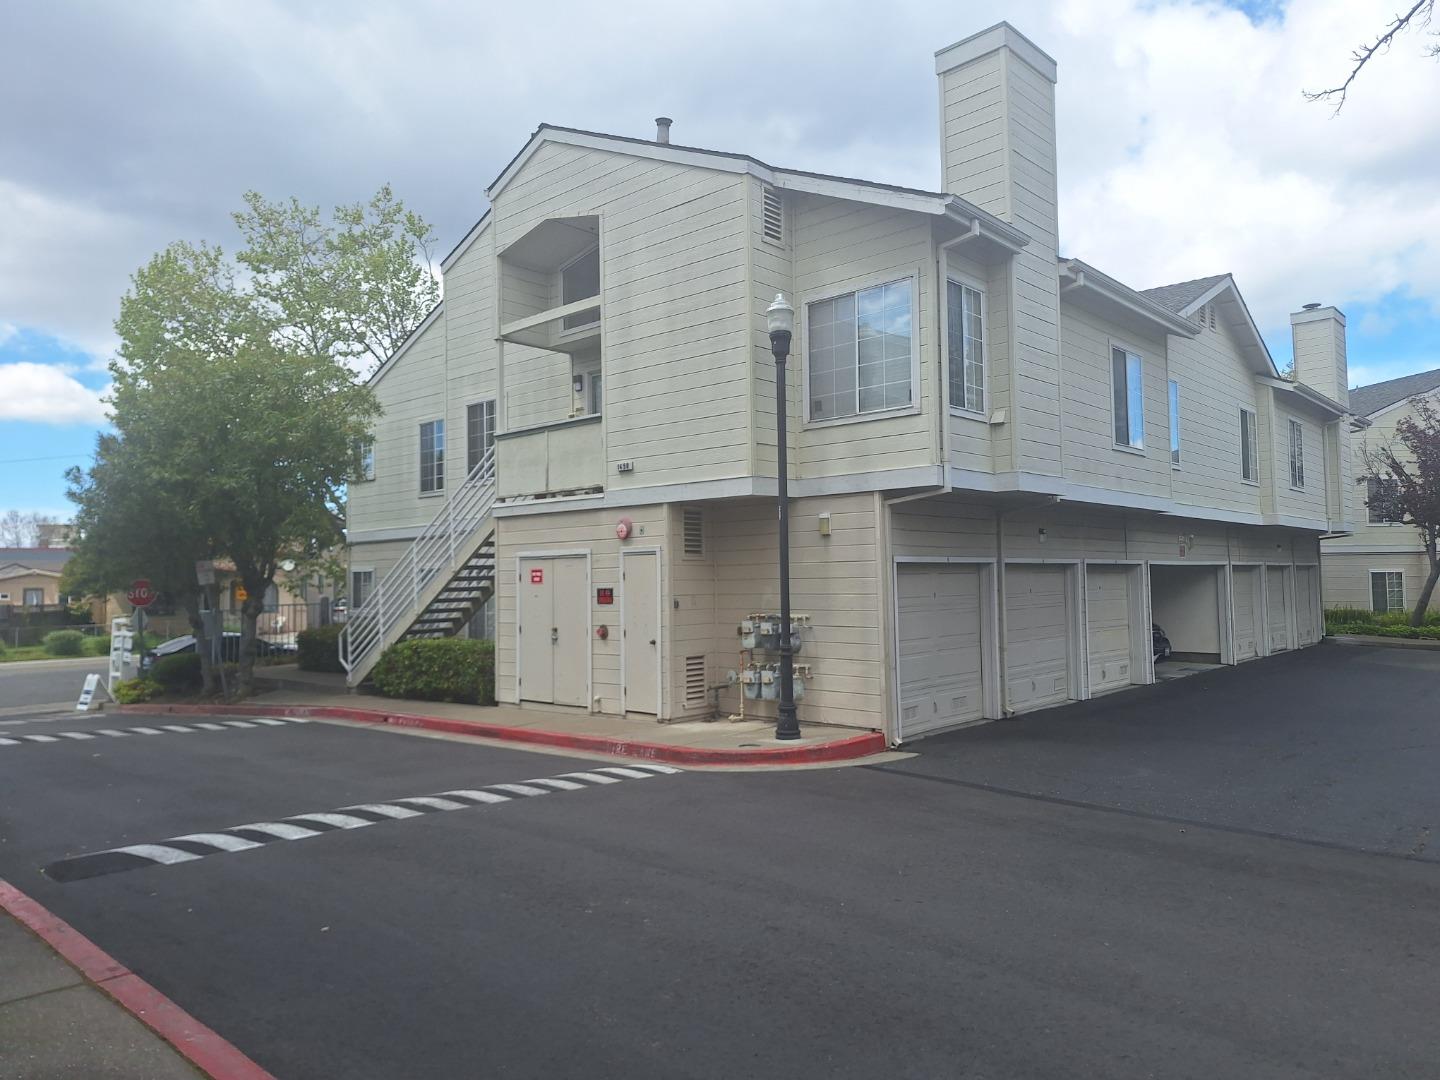 Photo of 1450 Thrush Ave #18 in San Leandro, CA